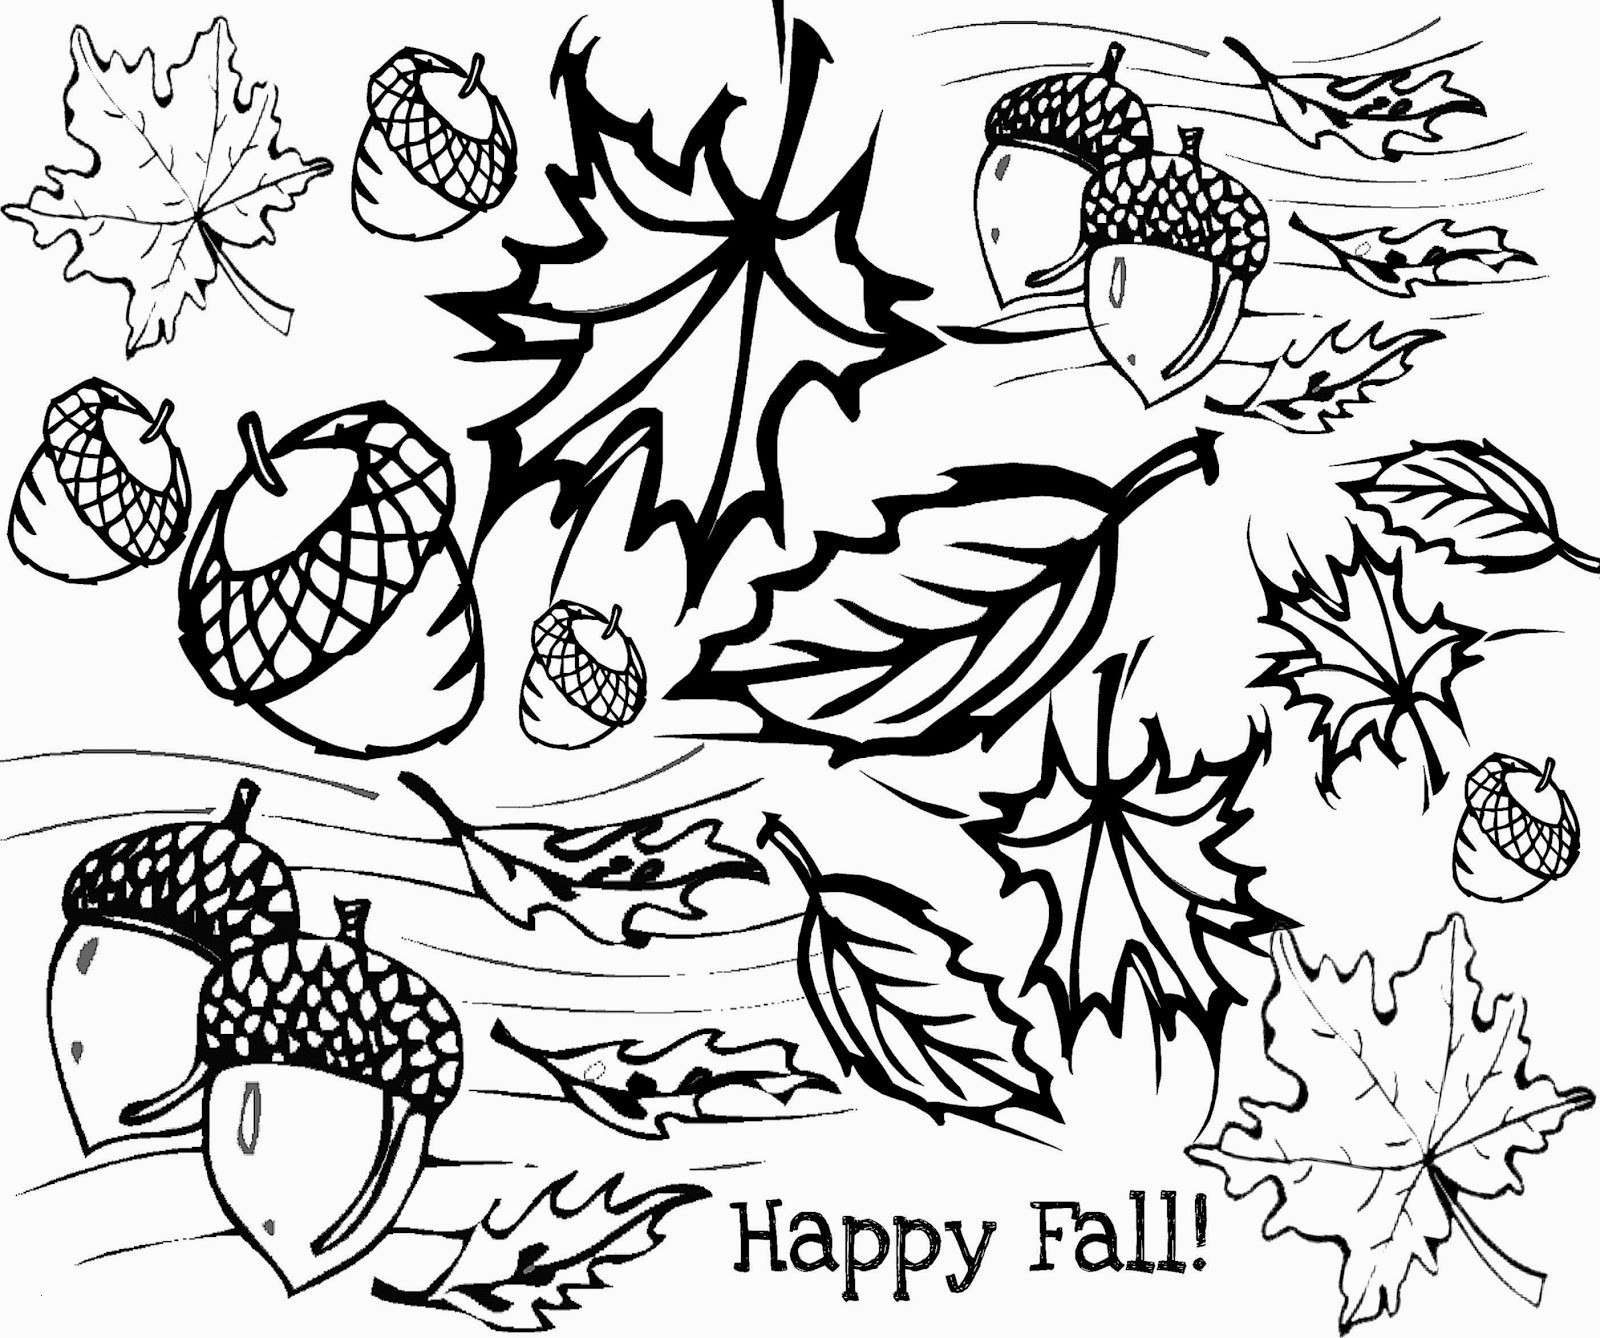 Fall Harvest Coloring Page Free Printable Coloring Pages Free